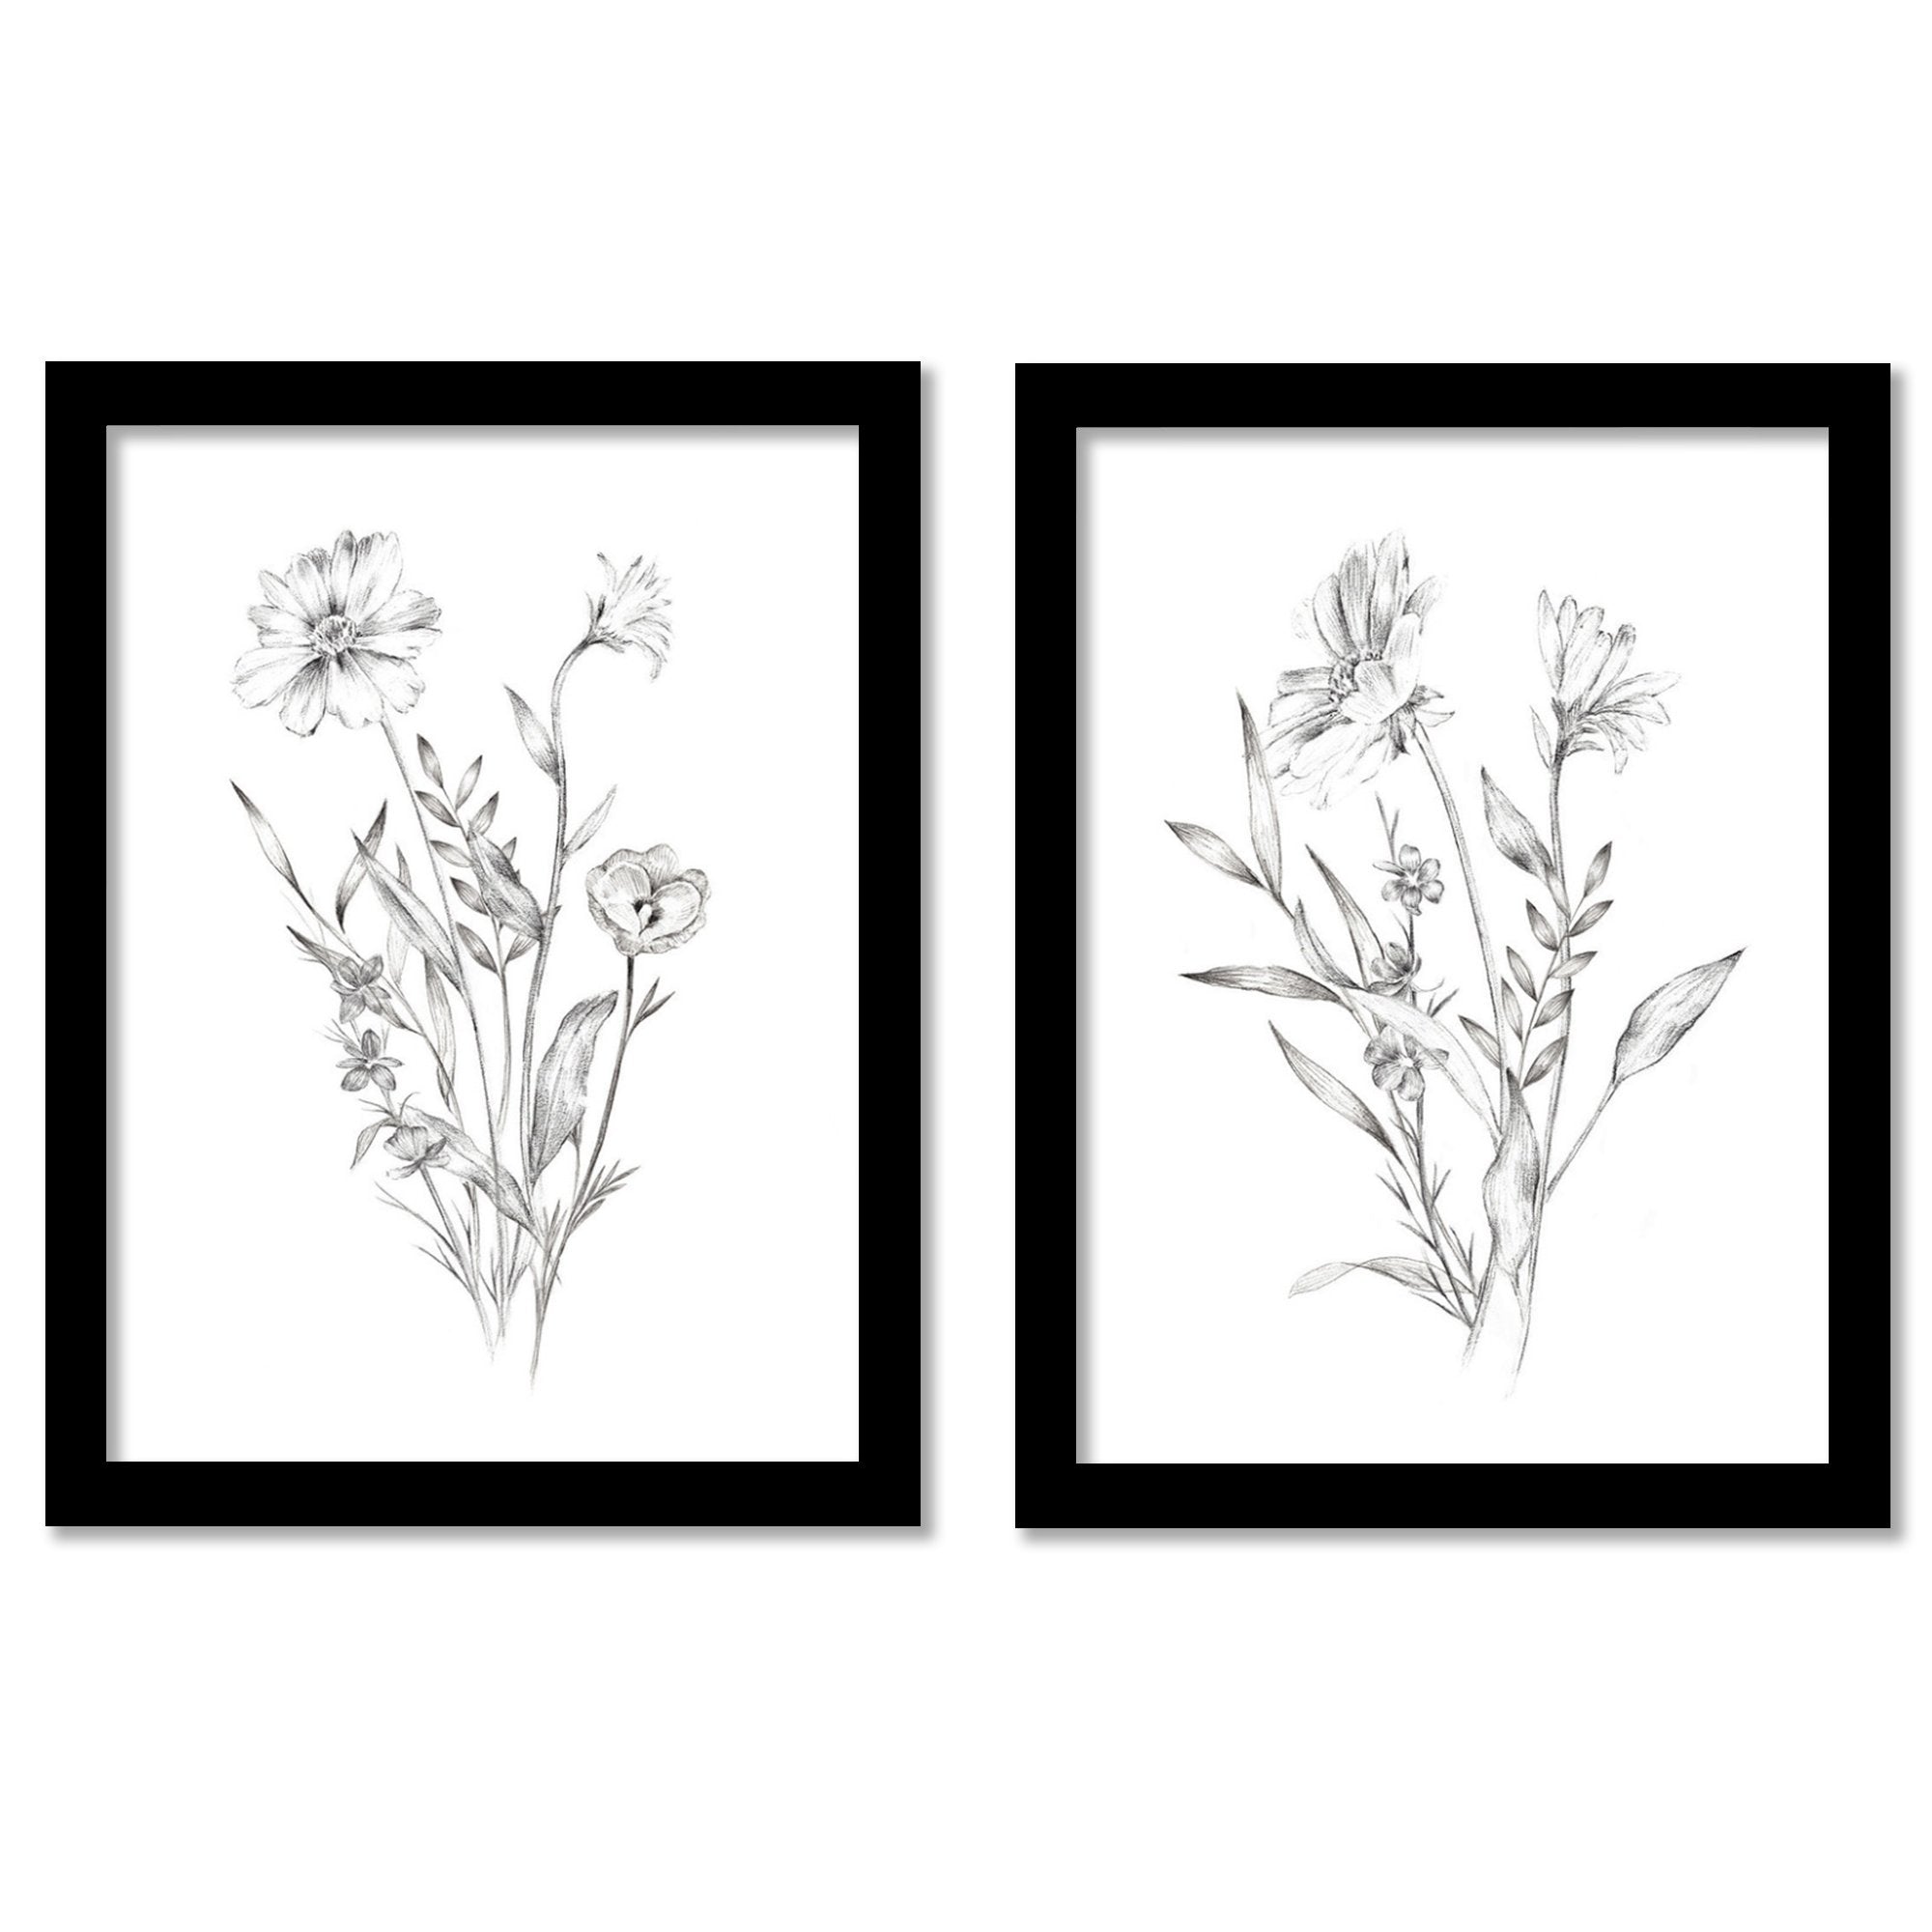 Blooming Sketch 1 Framed Print  Pottery Barn